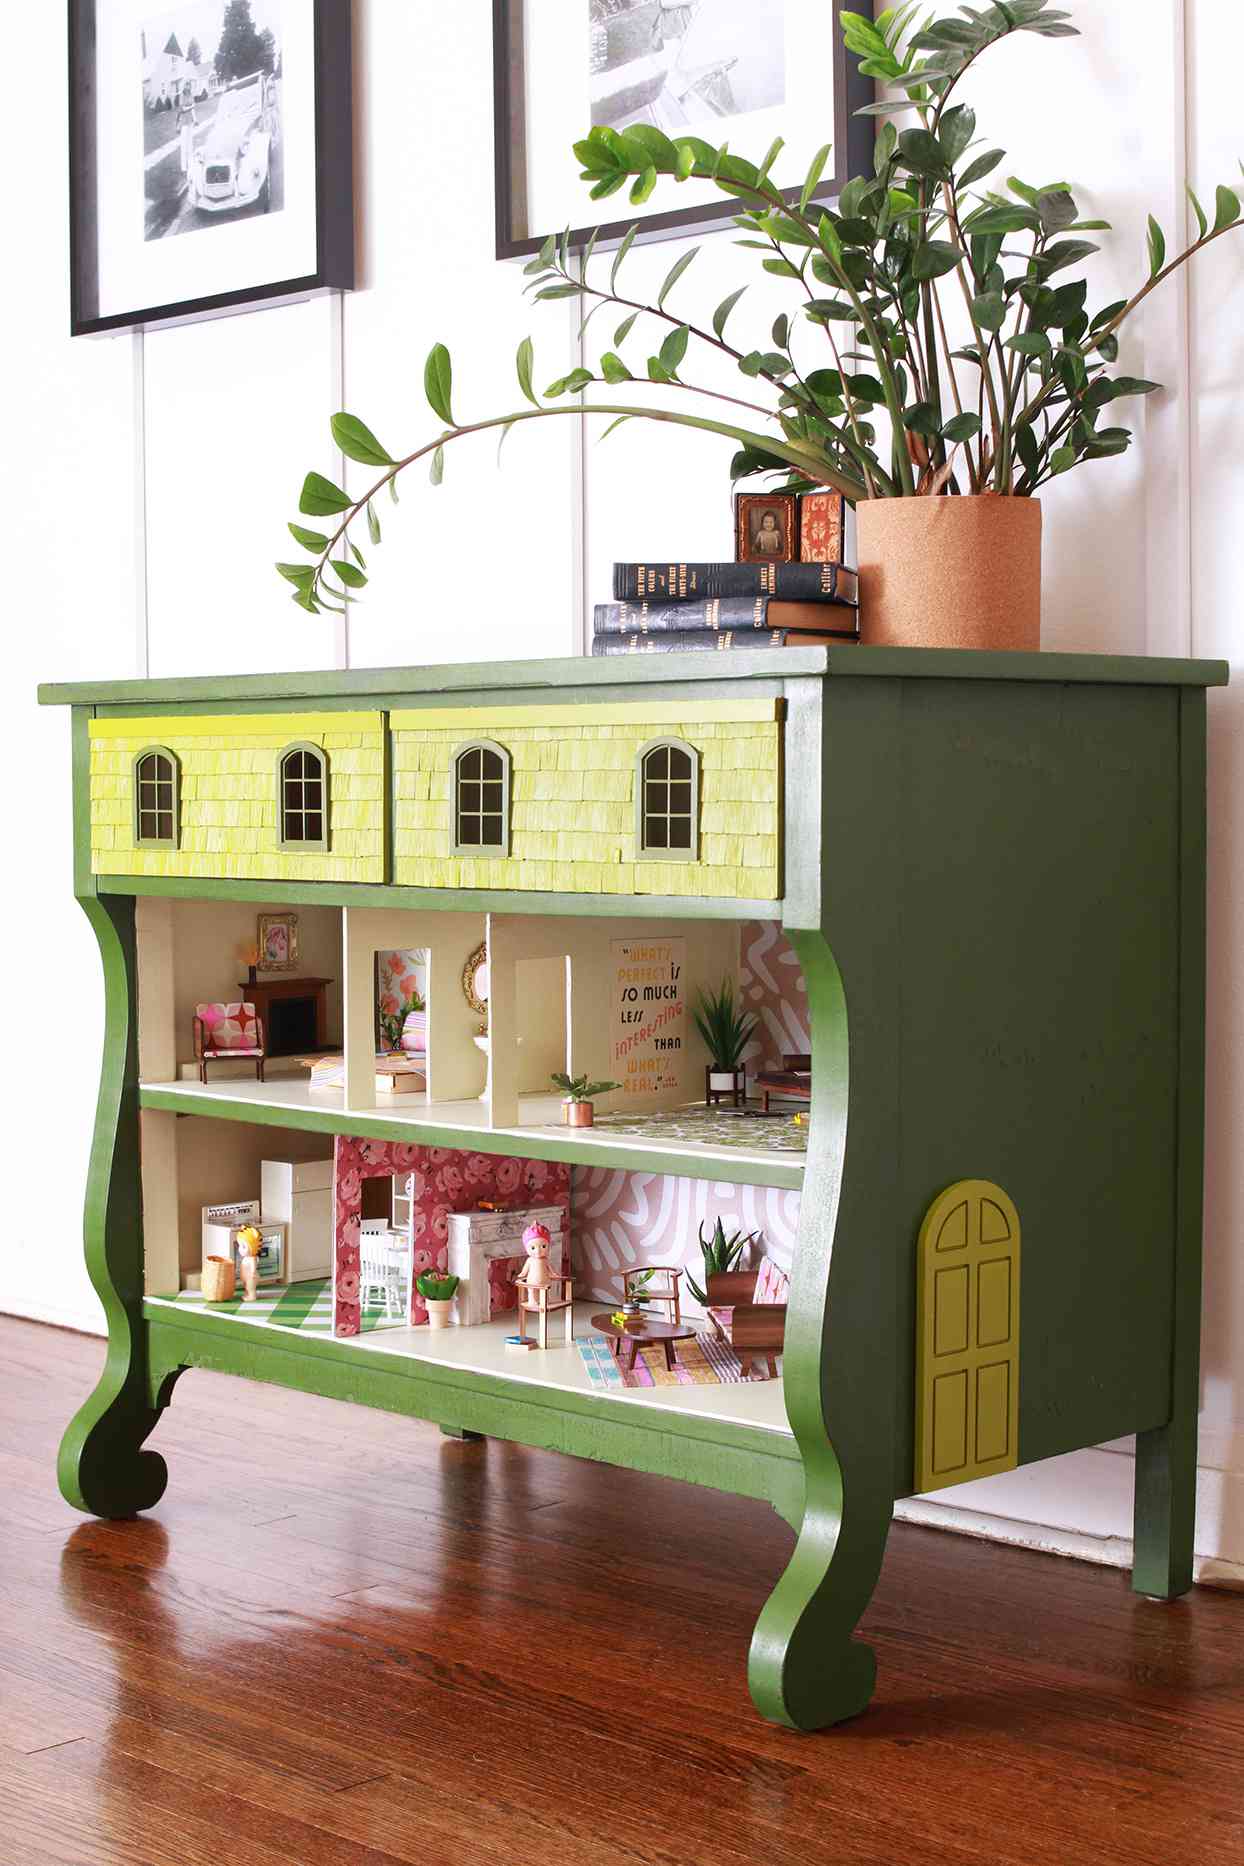 Upcycle A Dresser Into Dollhouse, Turn Chest Of Drawers Into Shelves